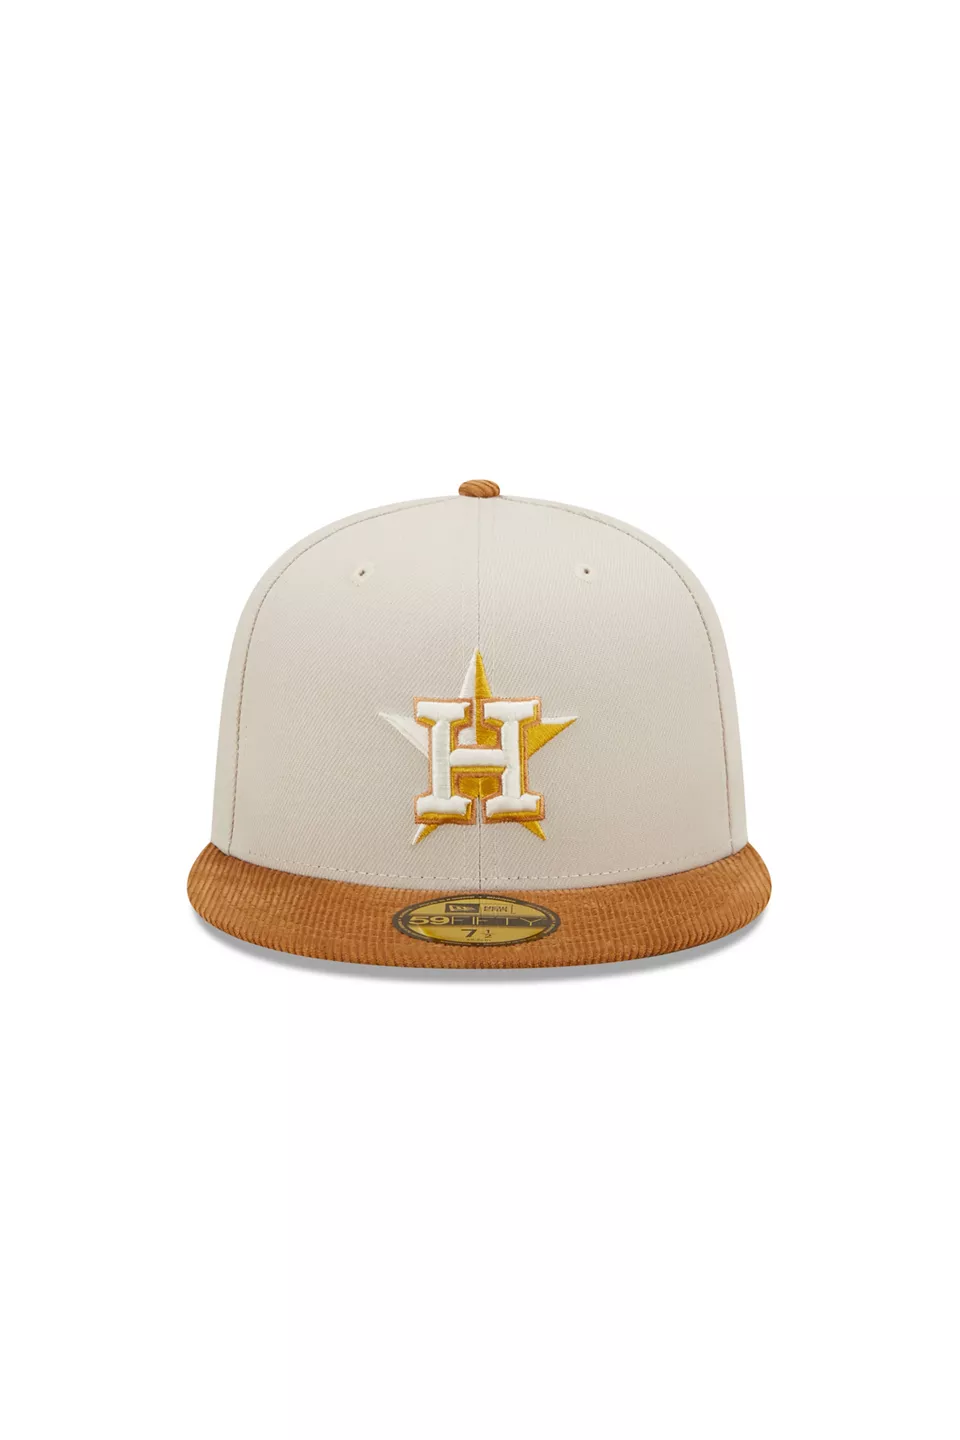 Houston Astros 59FIFTY Fitted Hats